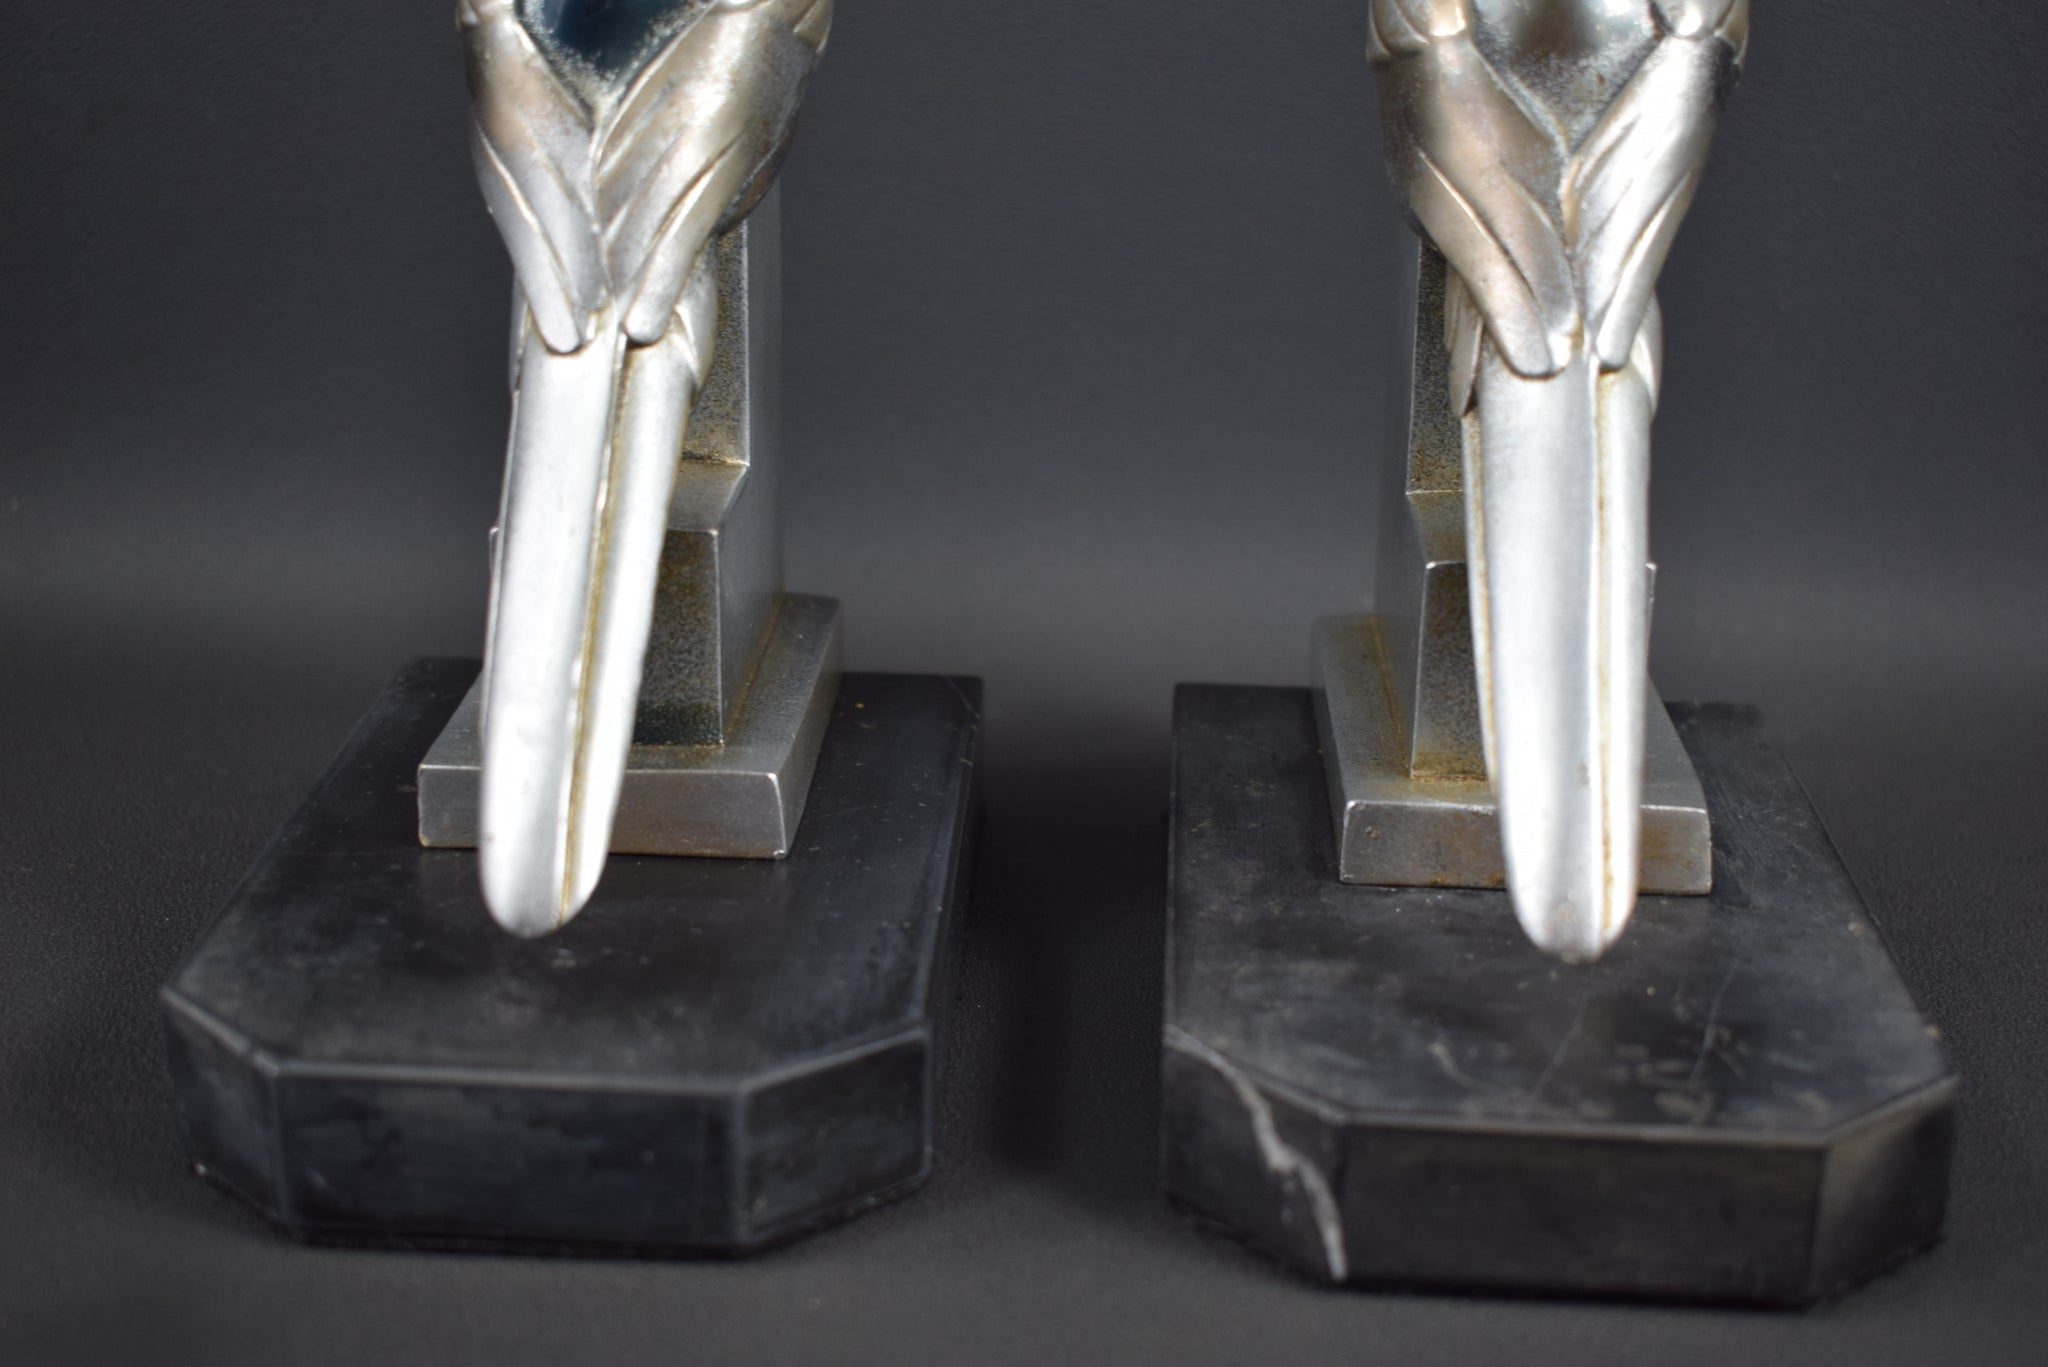 Pair of Birds Bookends